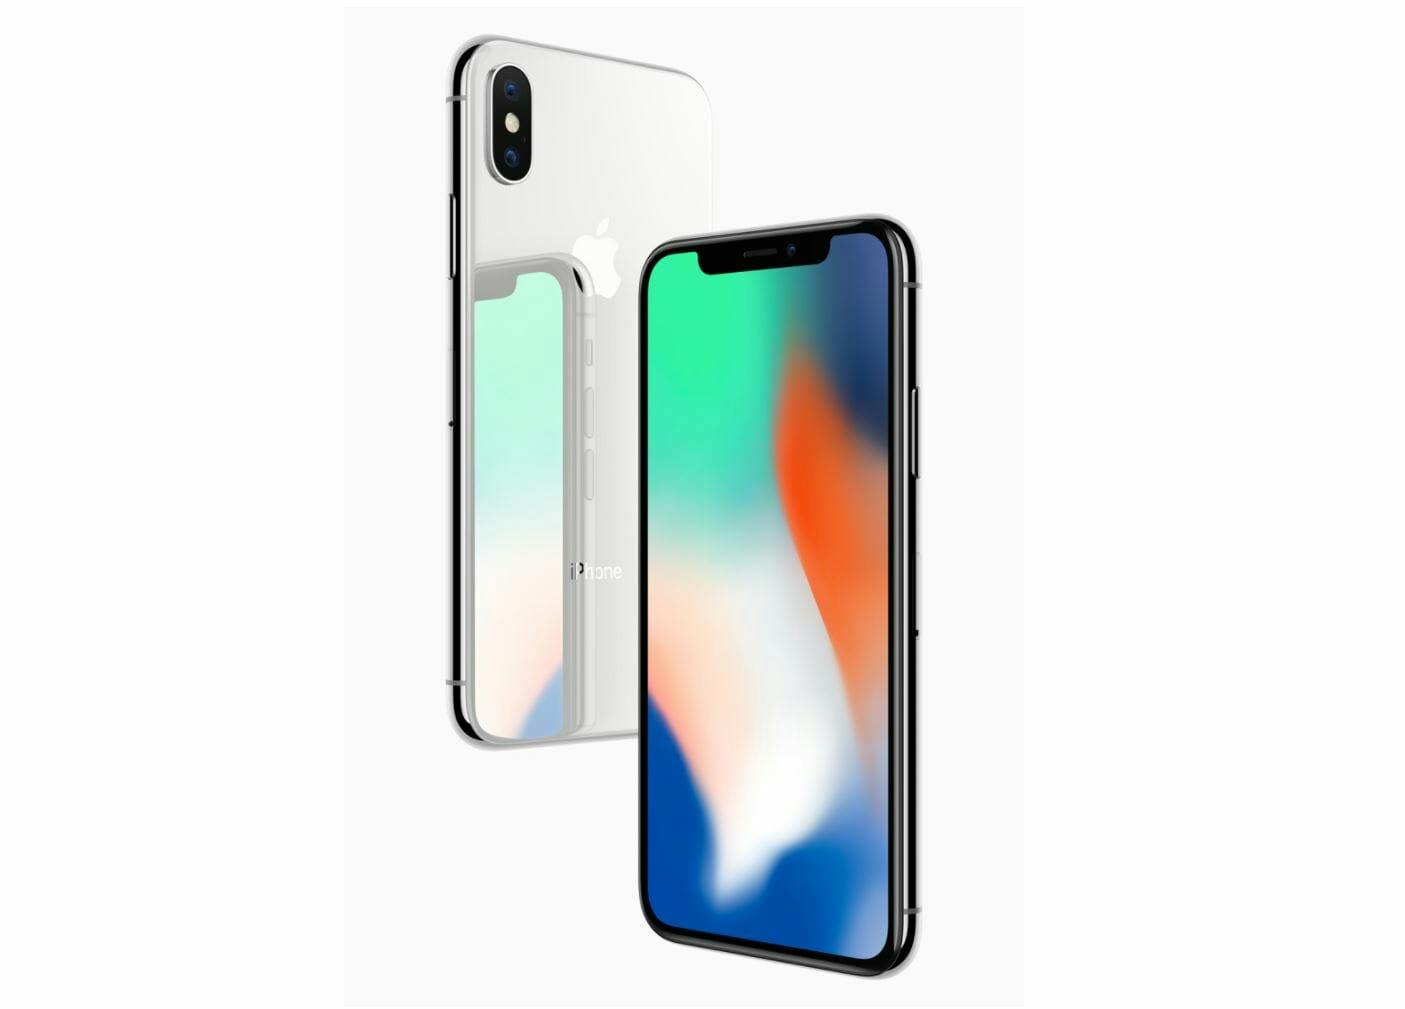 iphone x notch to blame for lower sales